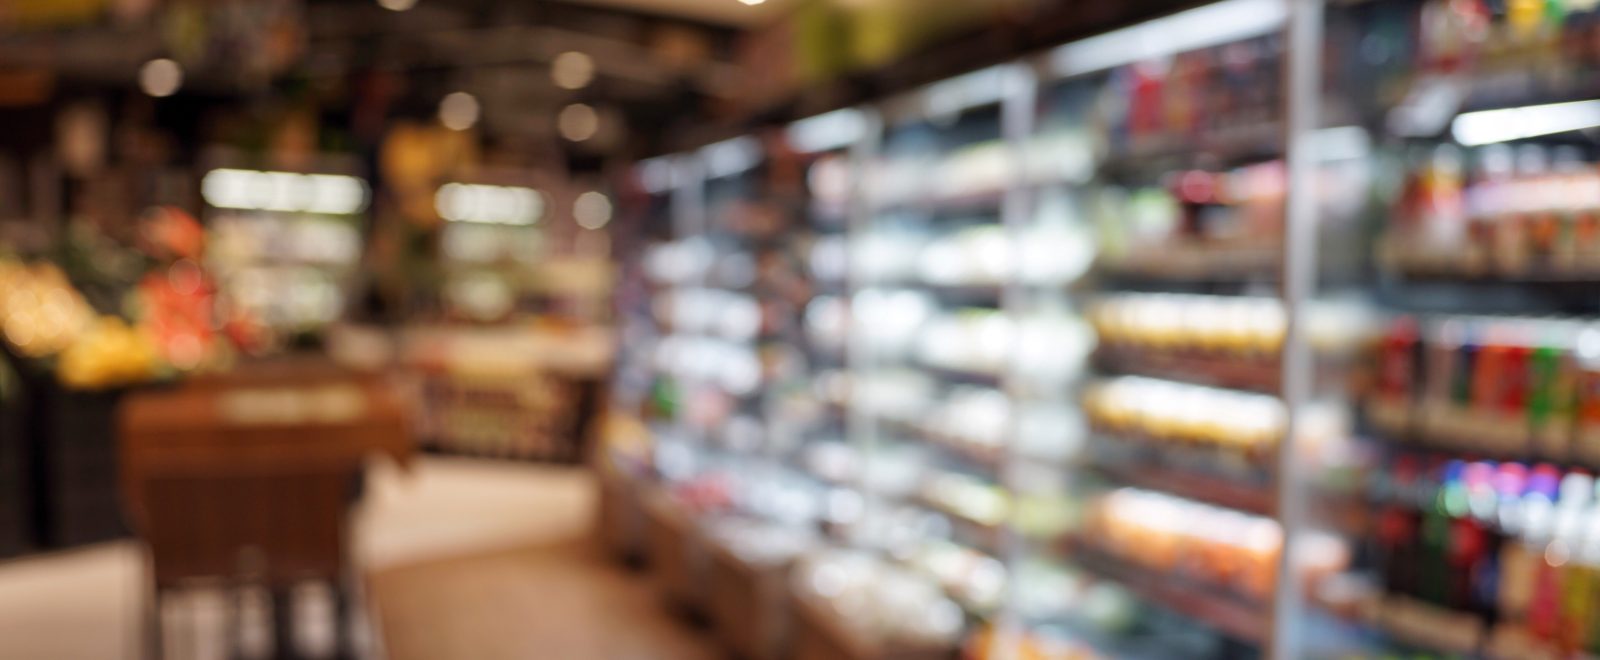 Defocused Image Of Food And Drink On Shelves In Illuminated Store